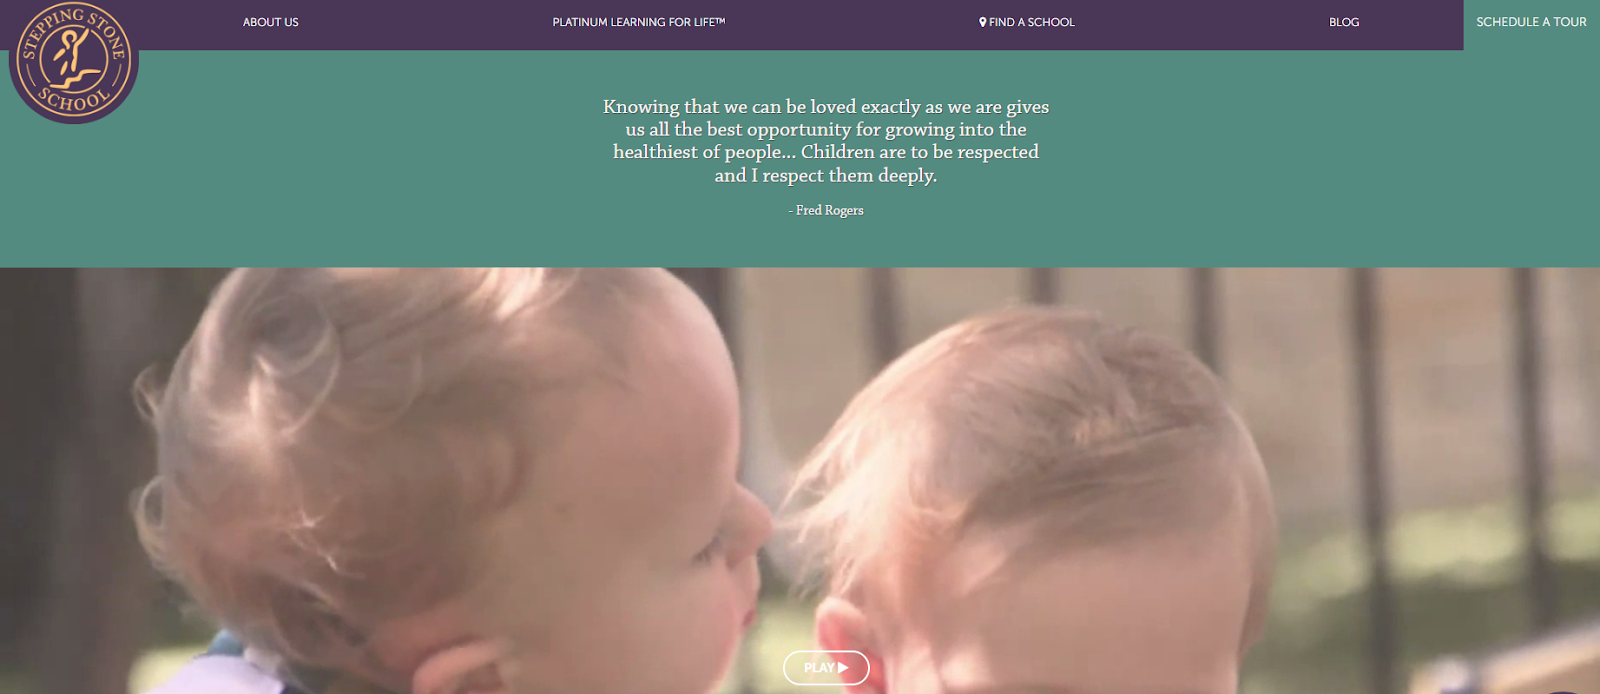 homepage for the daycare website stepping stone